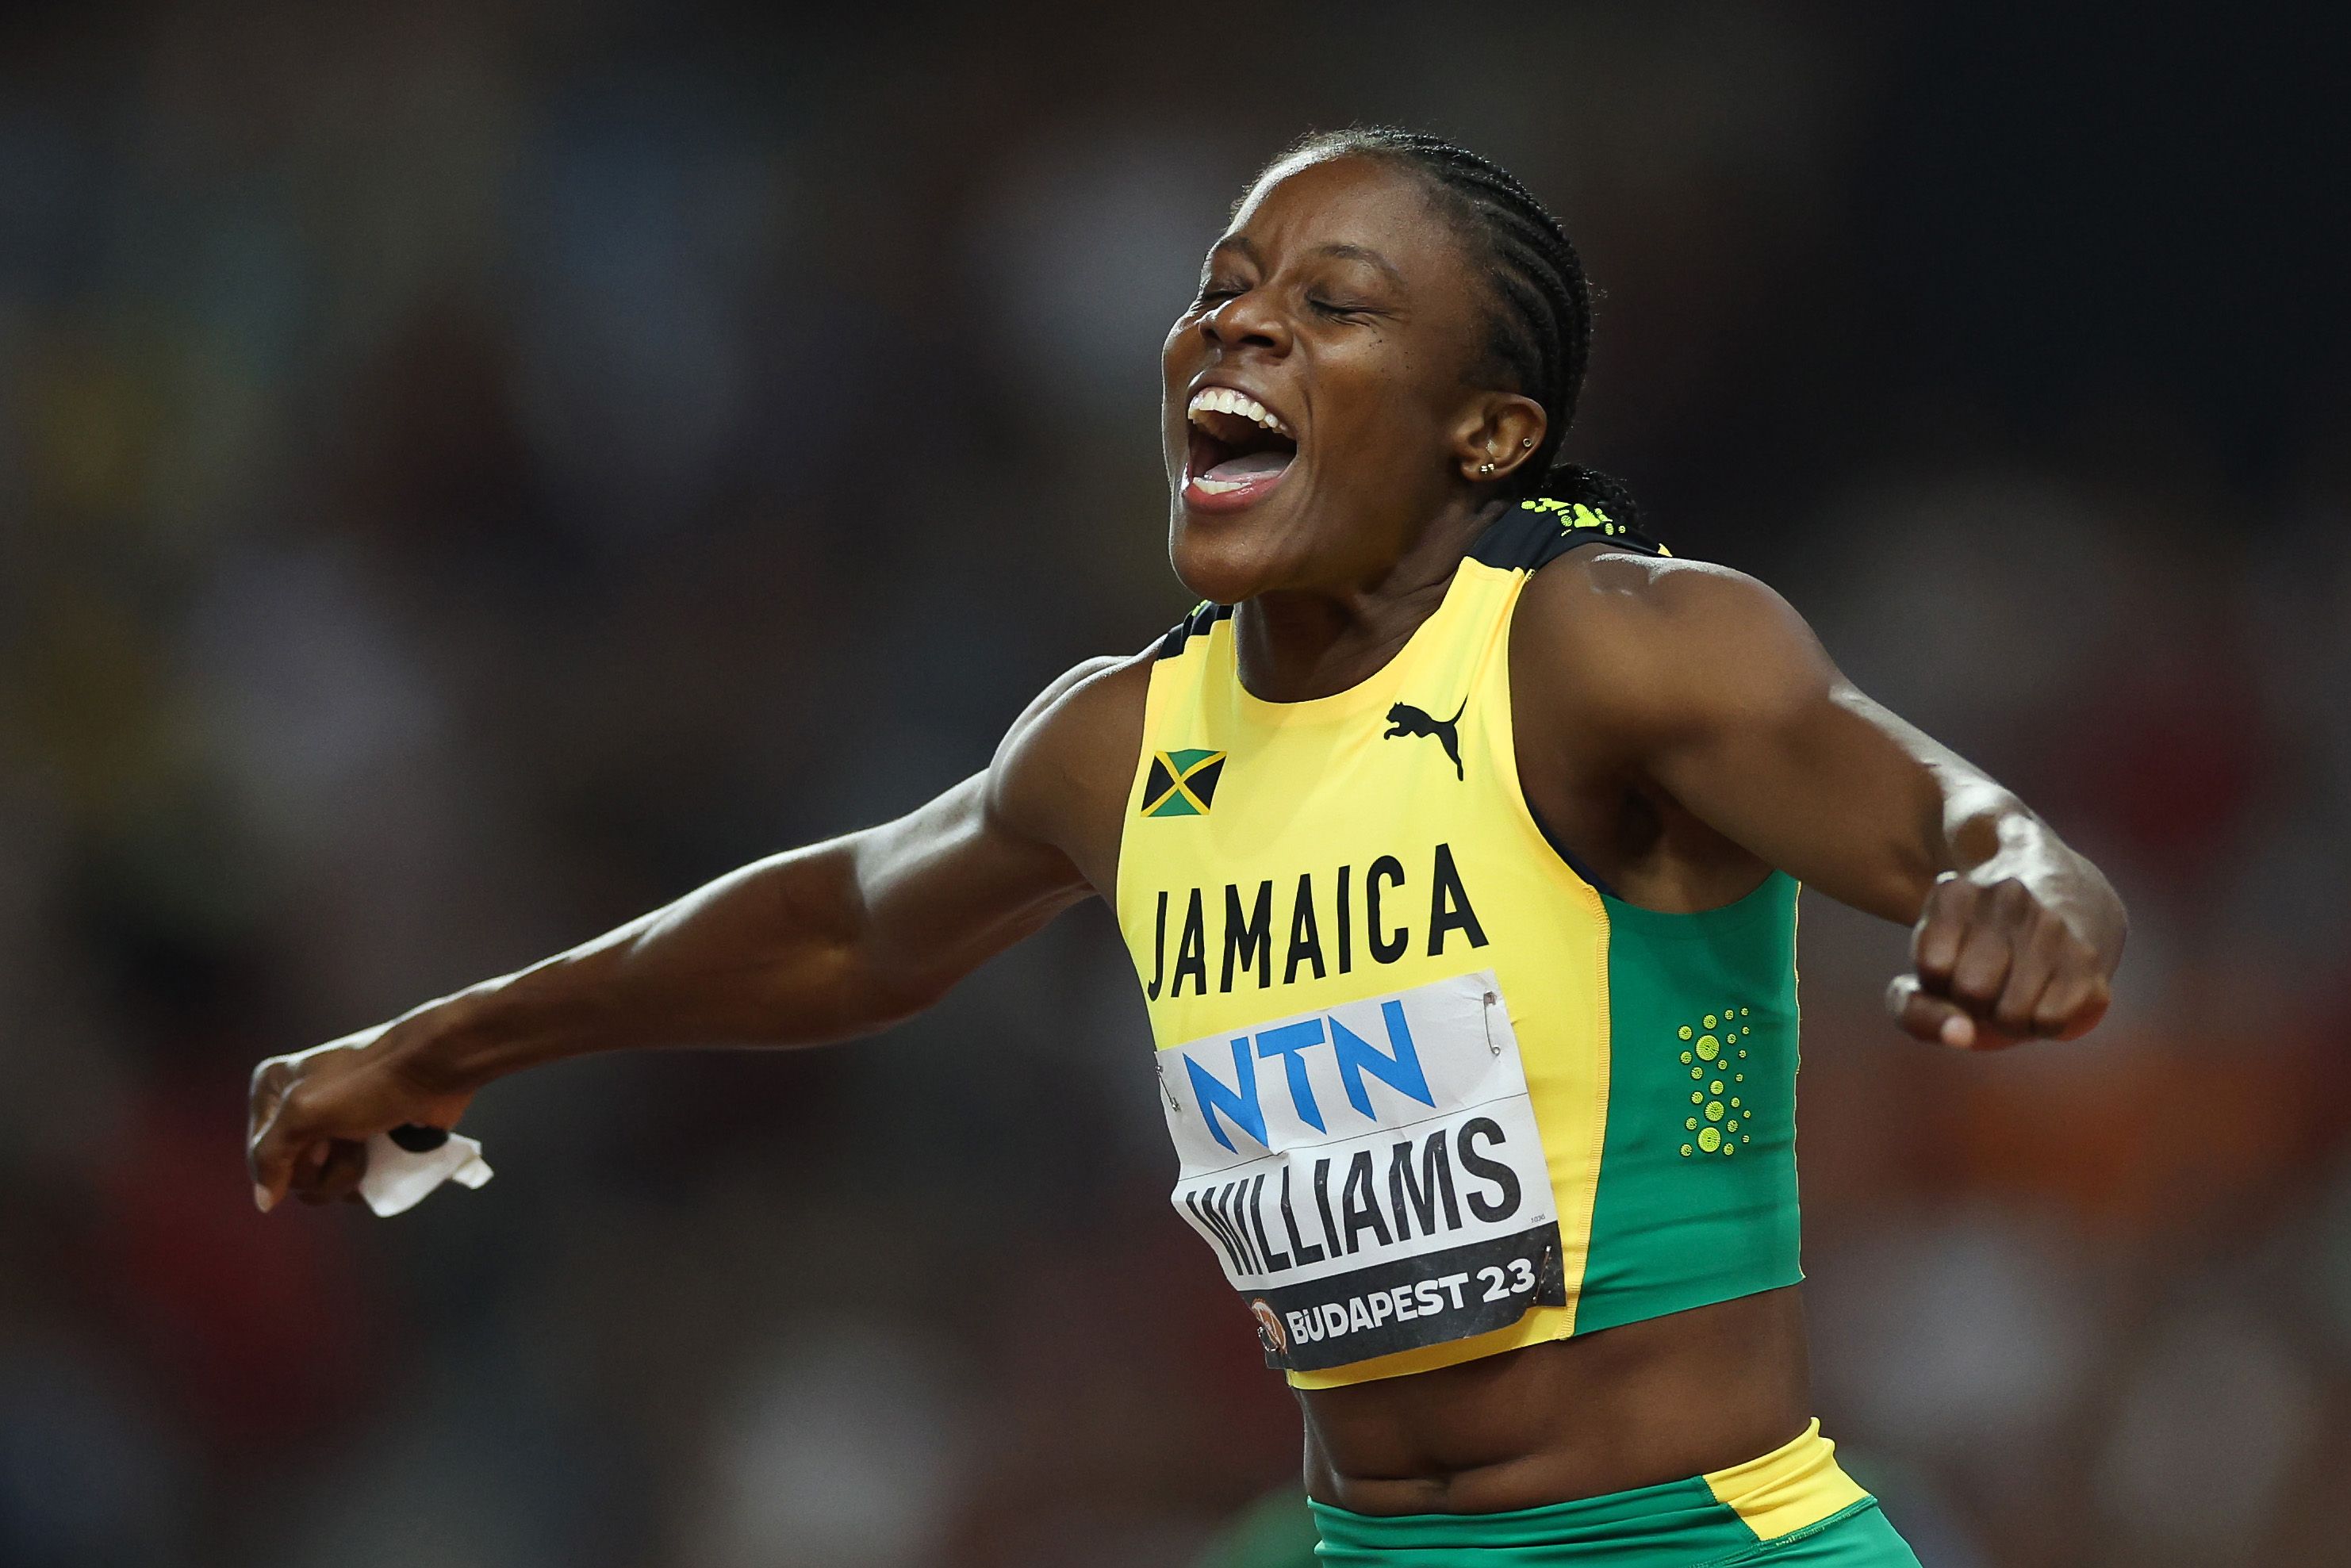 Danielle Williams after winning the 100m hurdles at the World Athletics Championships Budapest 23